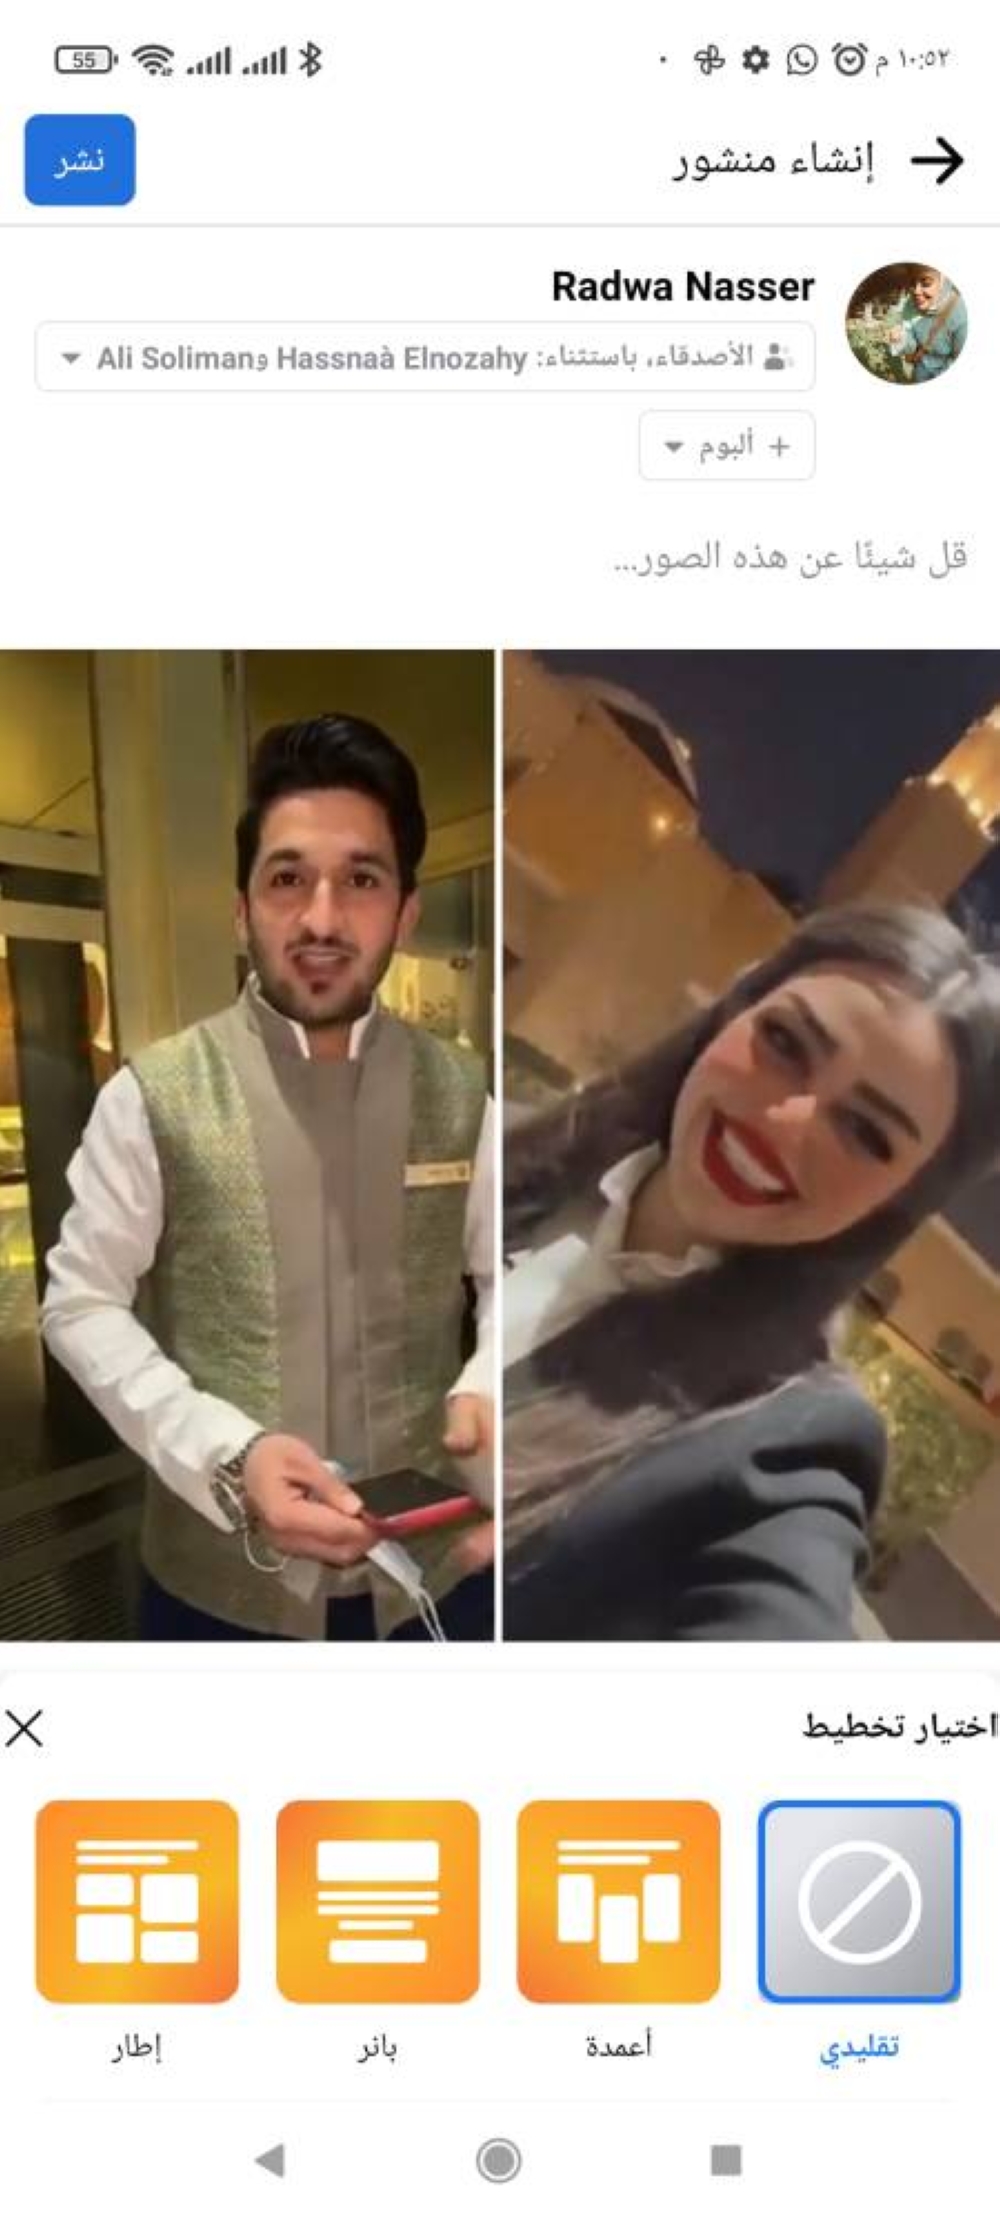 A Pakistani worker surprises Rahaf Al-Qahtani by following her on Snap.. Watch the latter’s reaction!